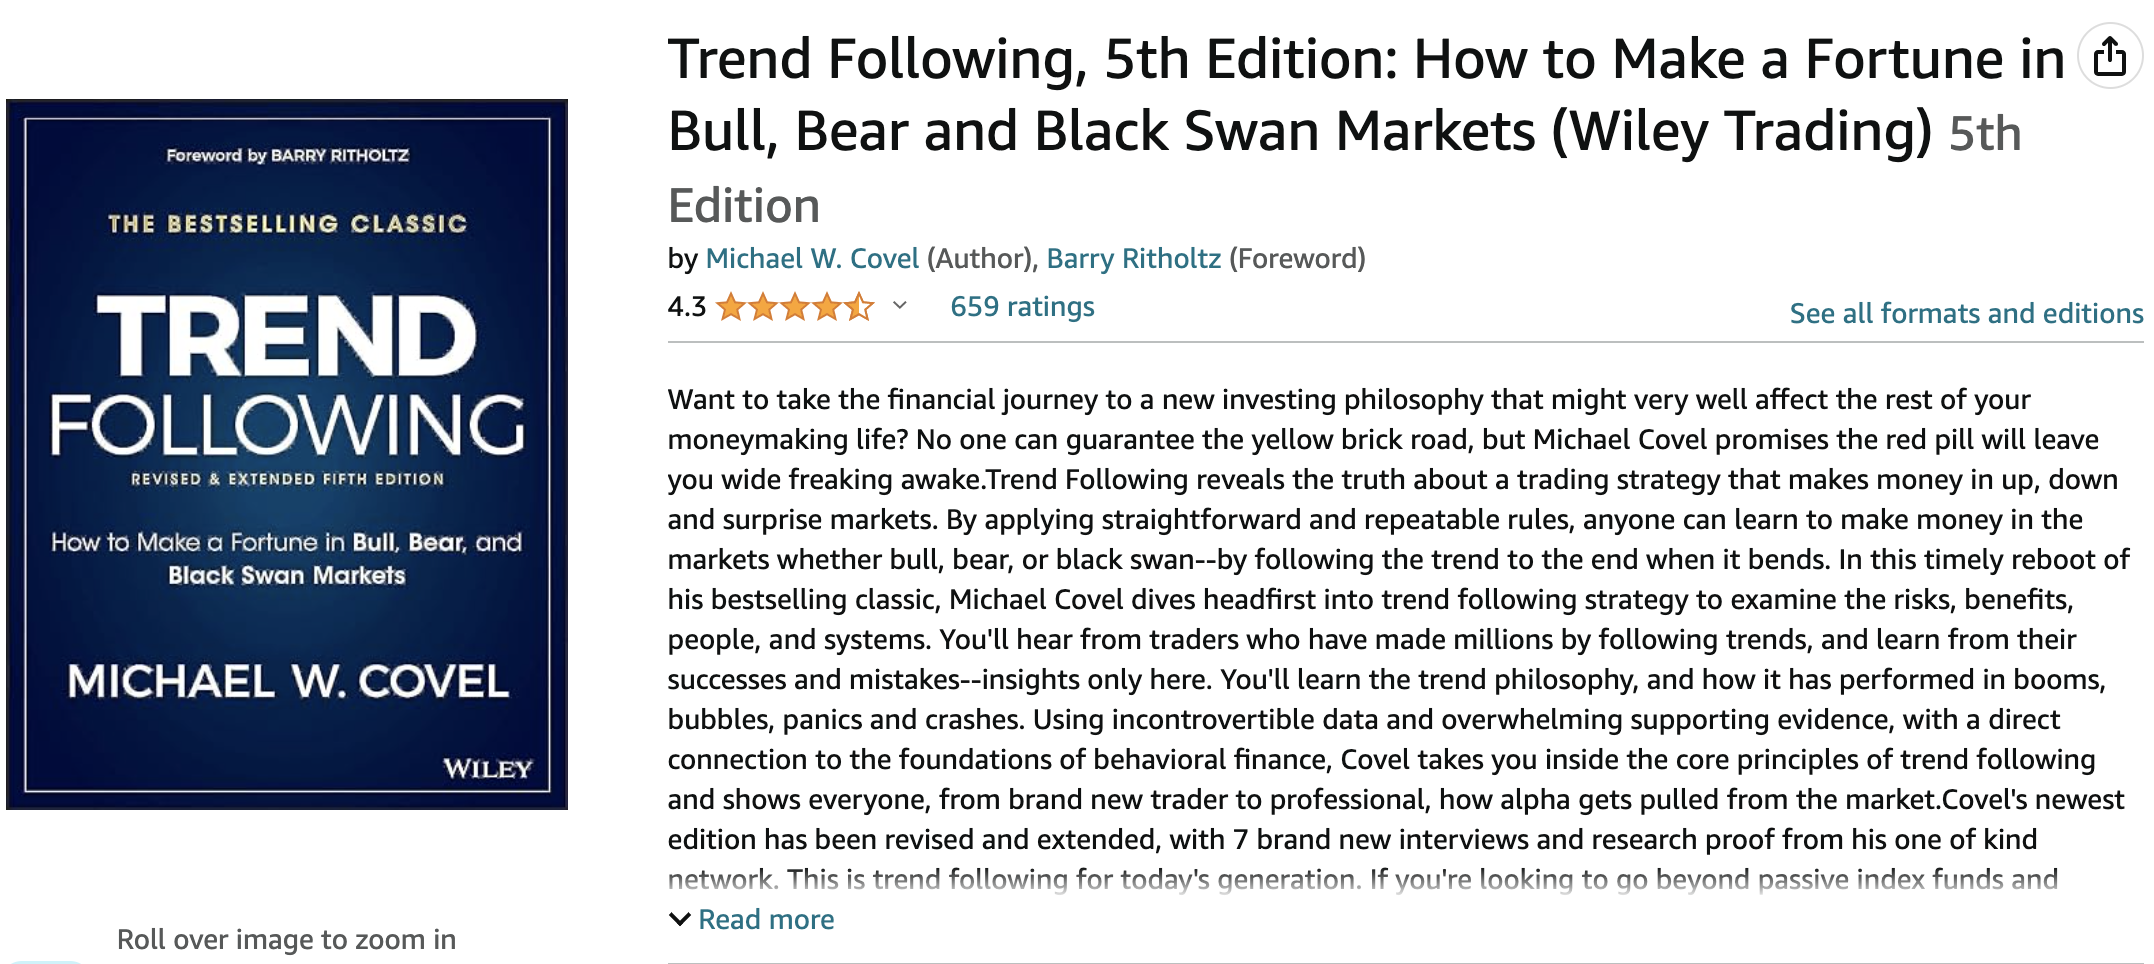 Books for Stock Traders: “Trend Following, 5th Edition” by Michael Covel